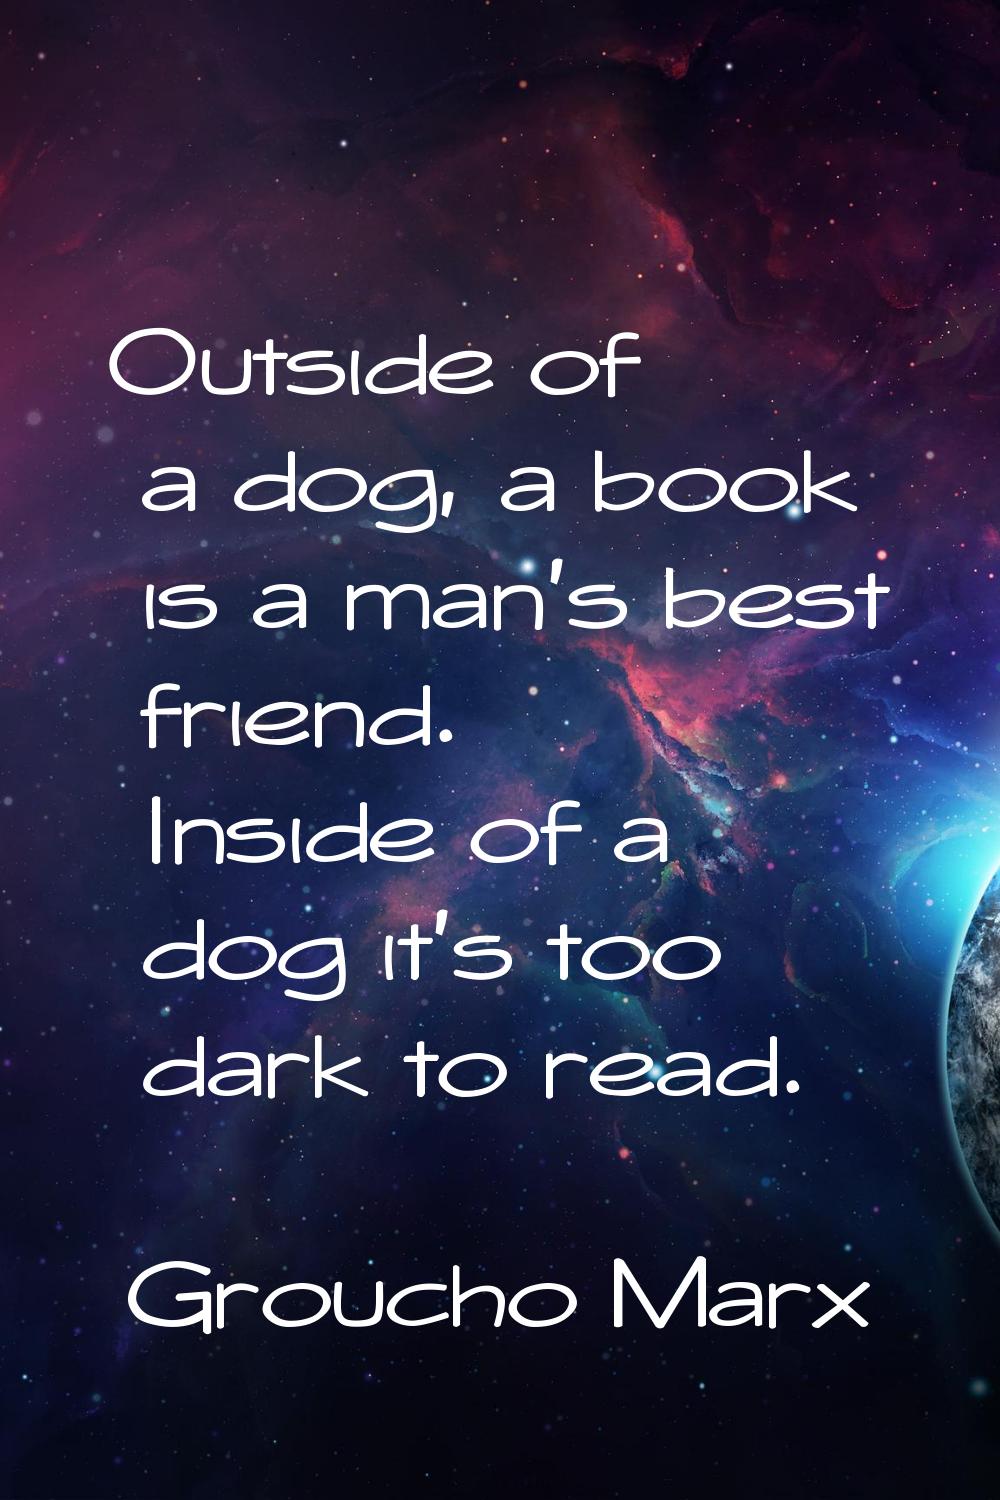 Outside of a dog, a book is a man's best friend. Inside of a dog it's too dark to read.